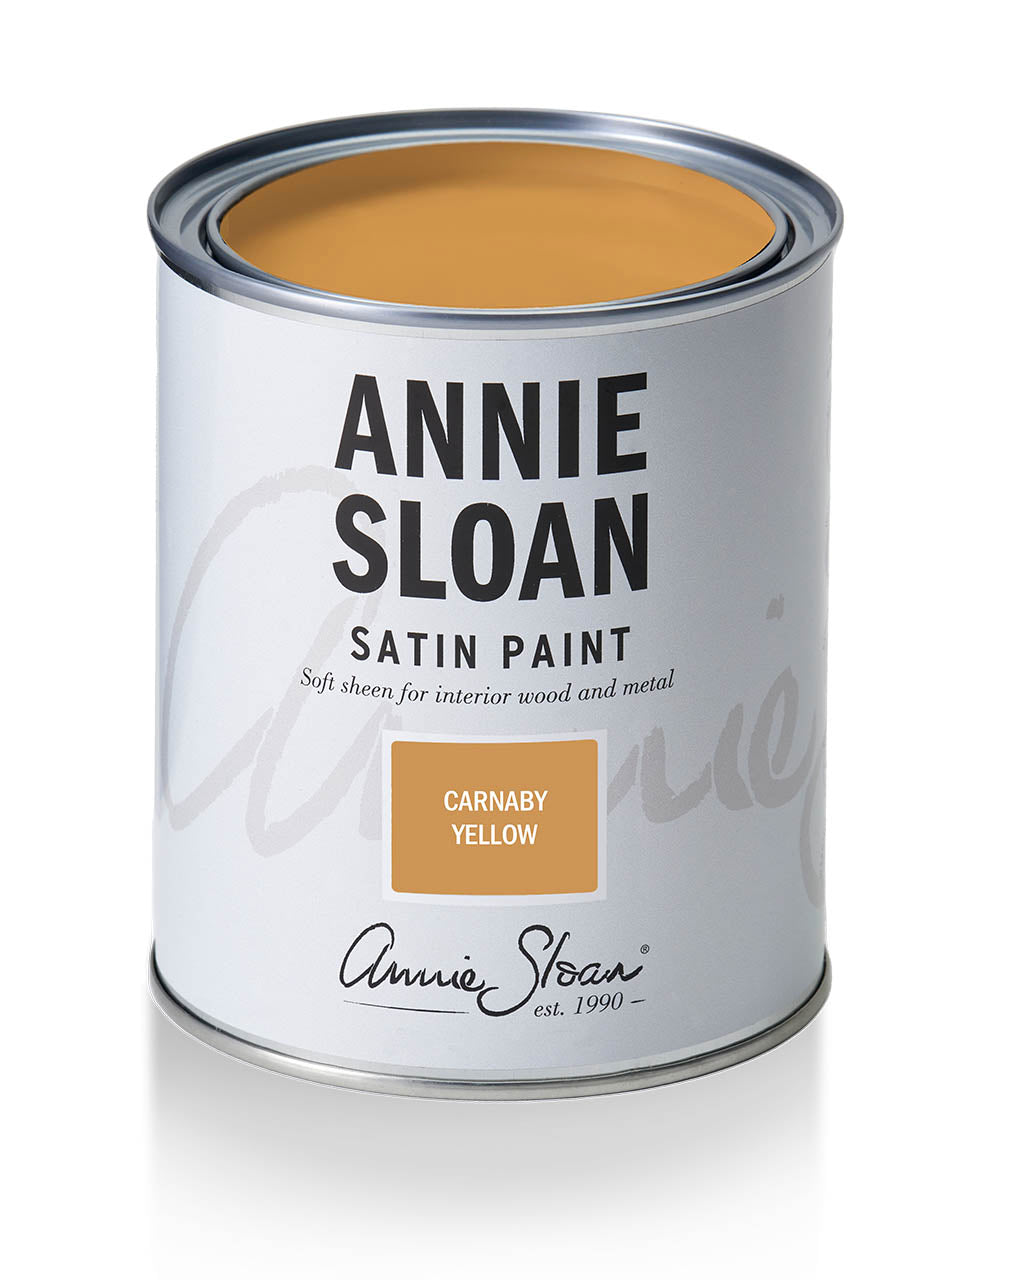 Annie Sloan Satin Paint, Carnaby Yellow 750 ml